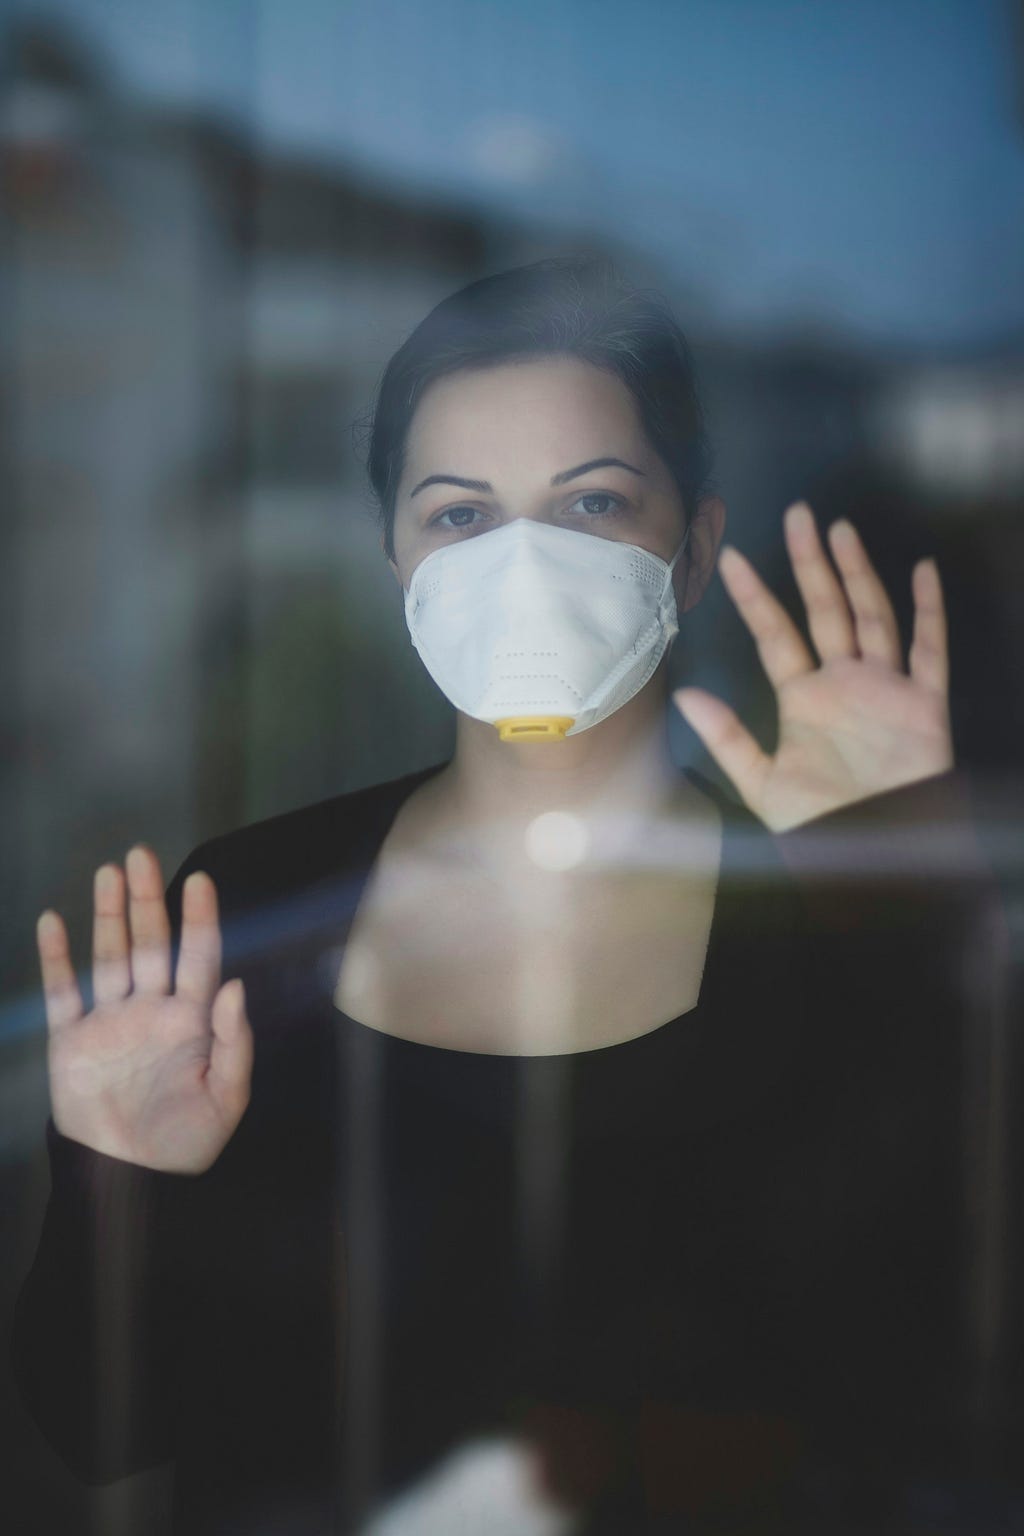 A woman wearing a mask looking out the window with her hands on the window